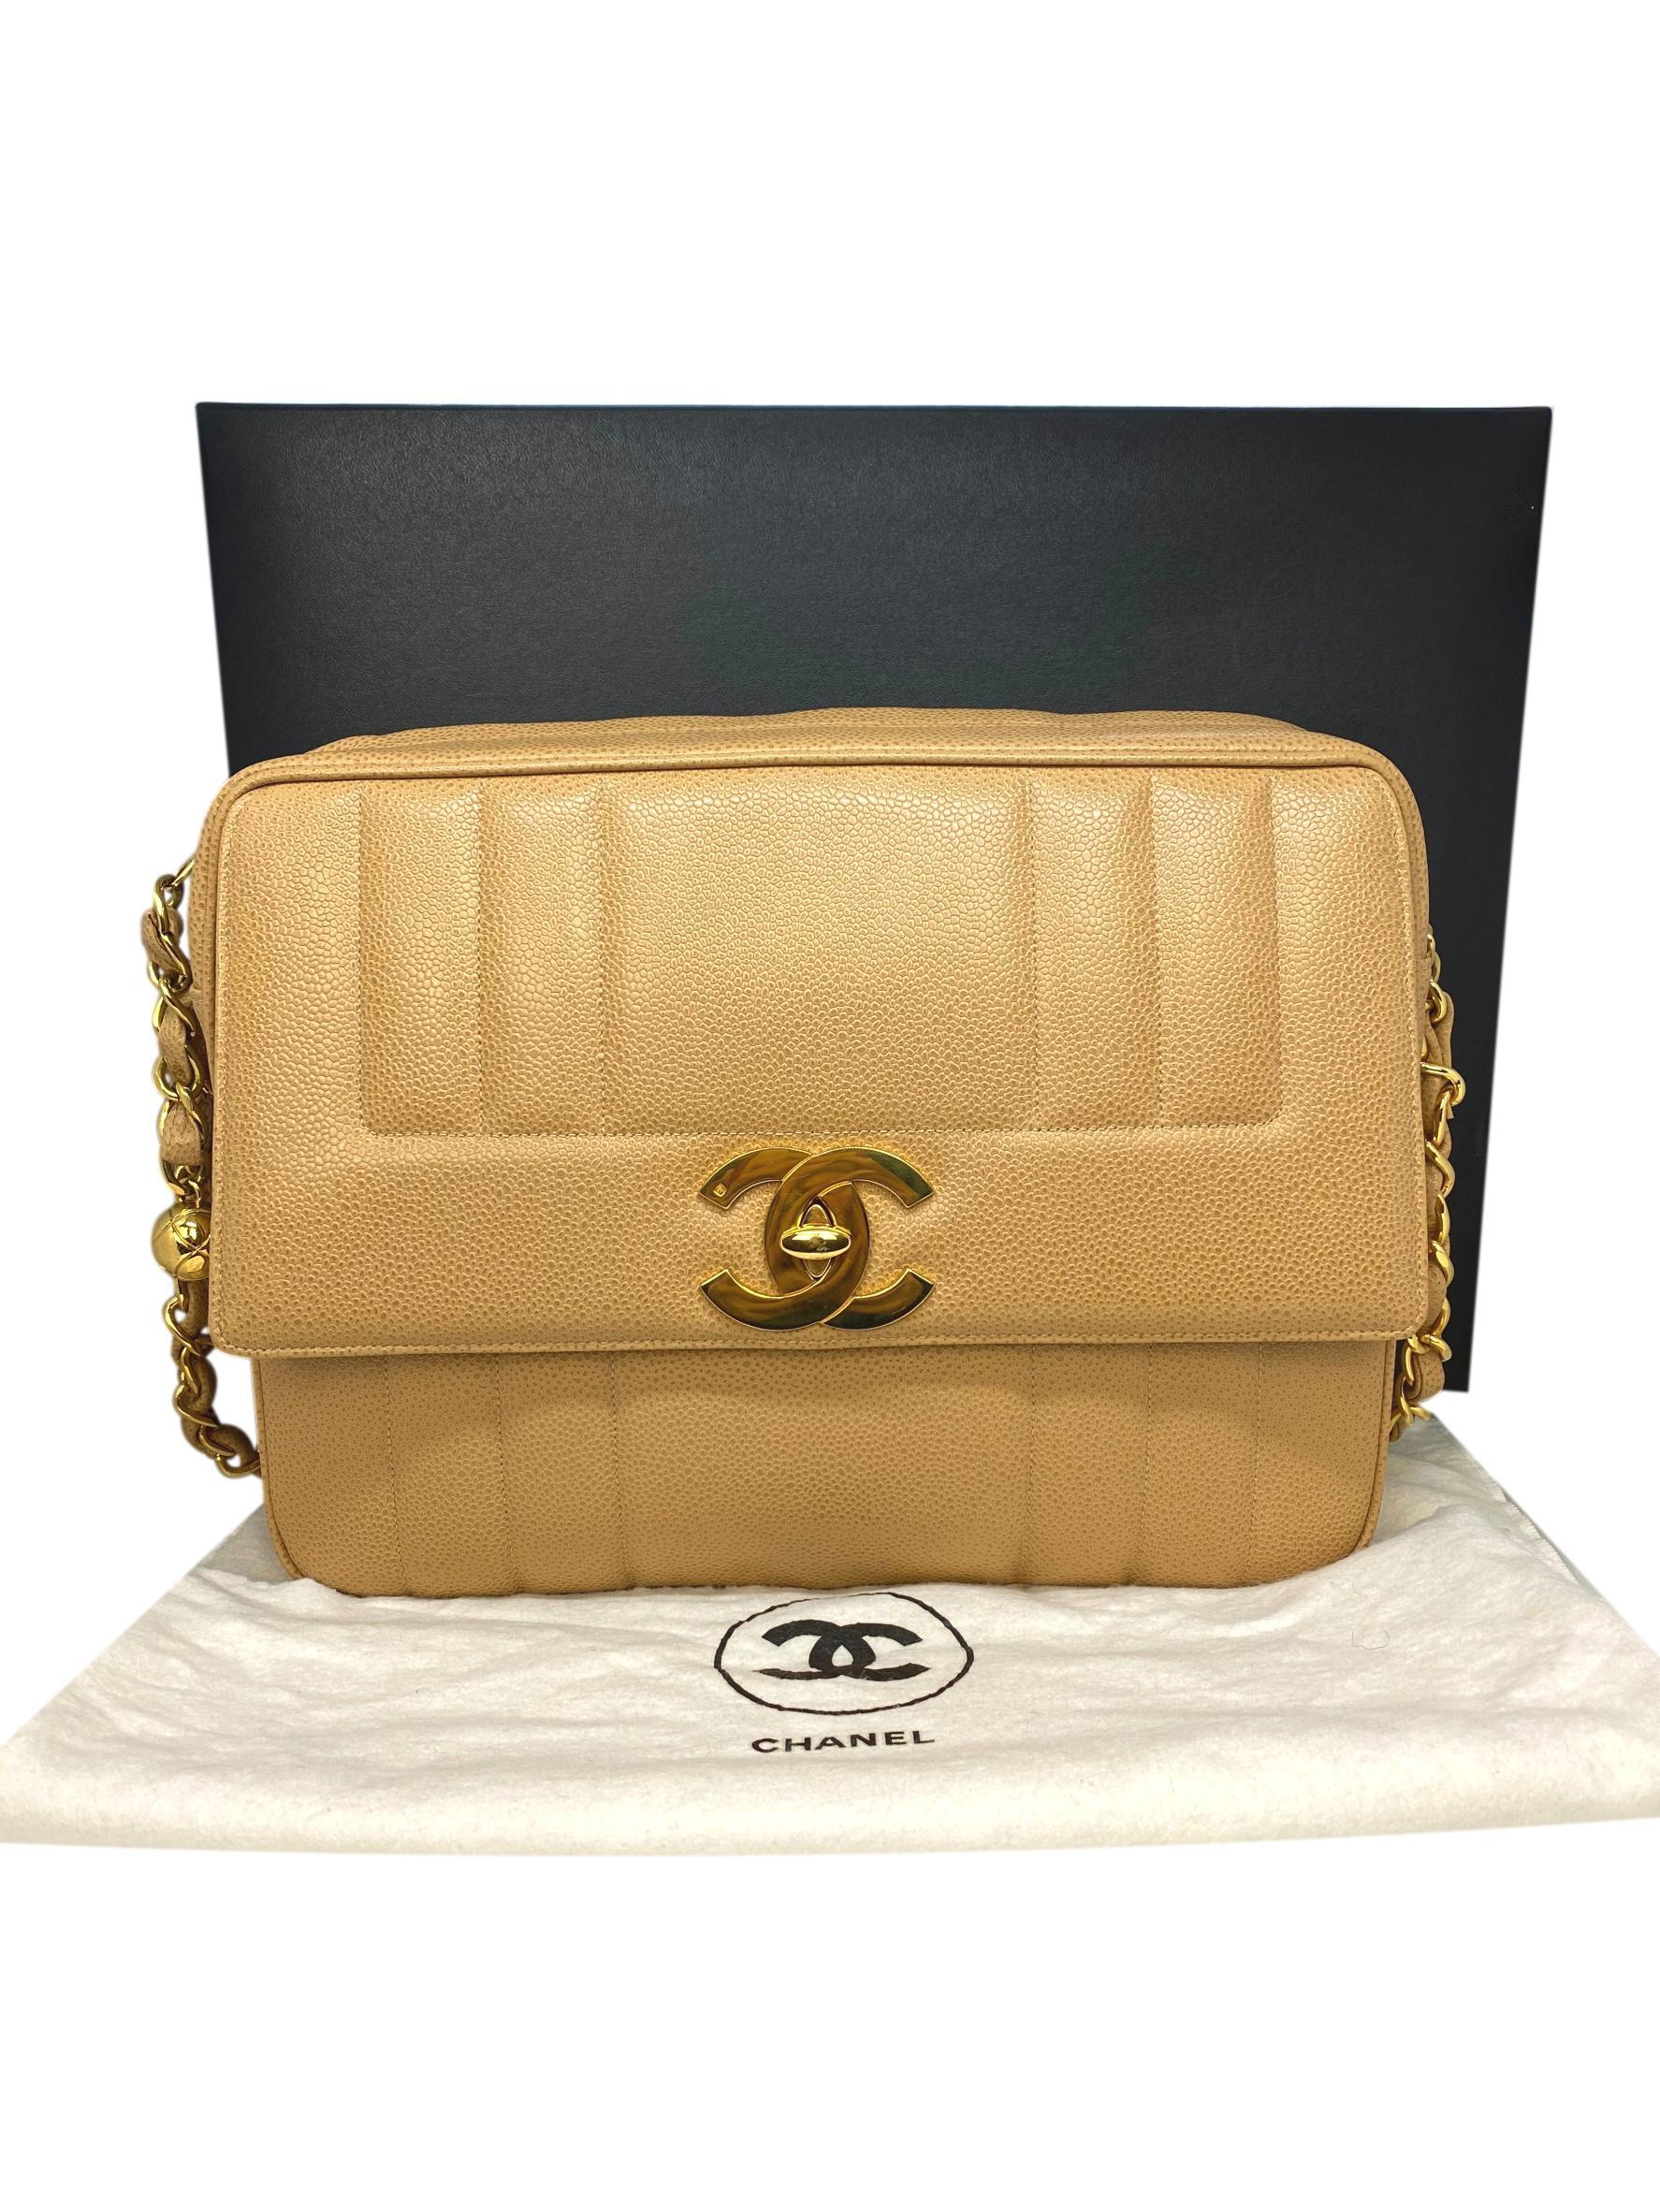 Chanel Vintage Tan Caviar Leather Camera Crossbody Bag with Gold Hardware. This highly coveted and rare collectible crossbody camera bag was produced between 1994 - 1996, baring a serial code of 